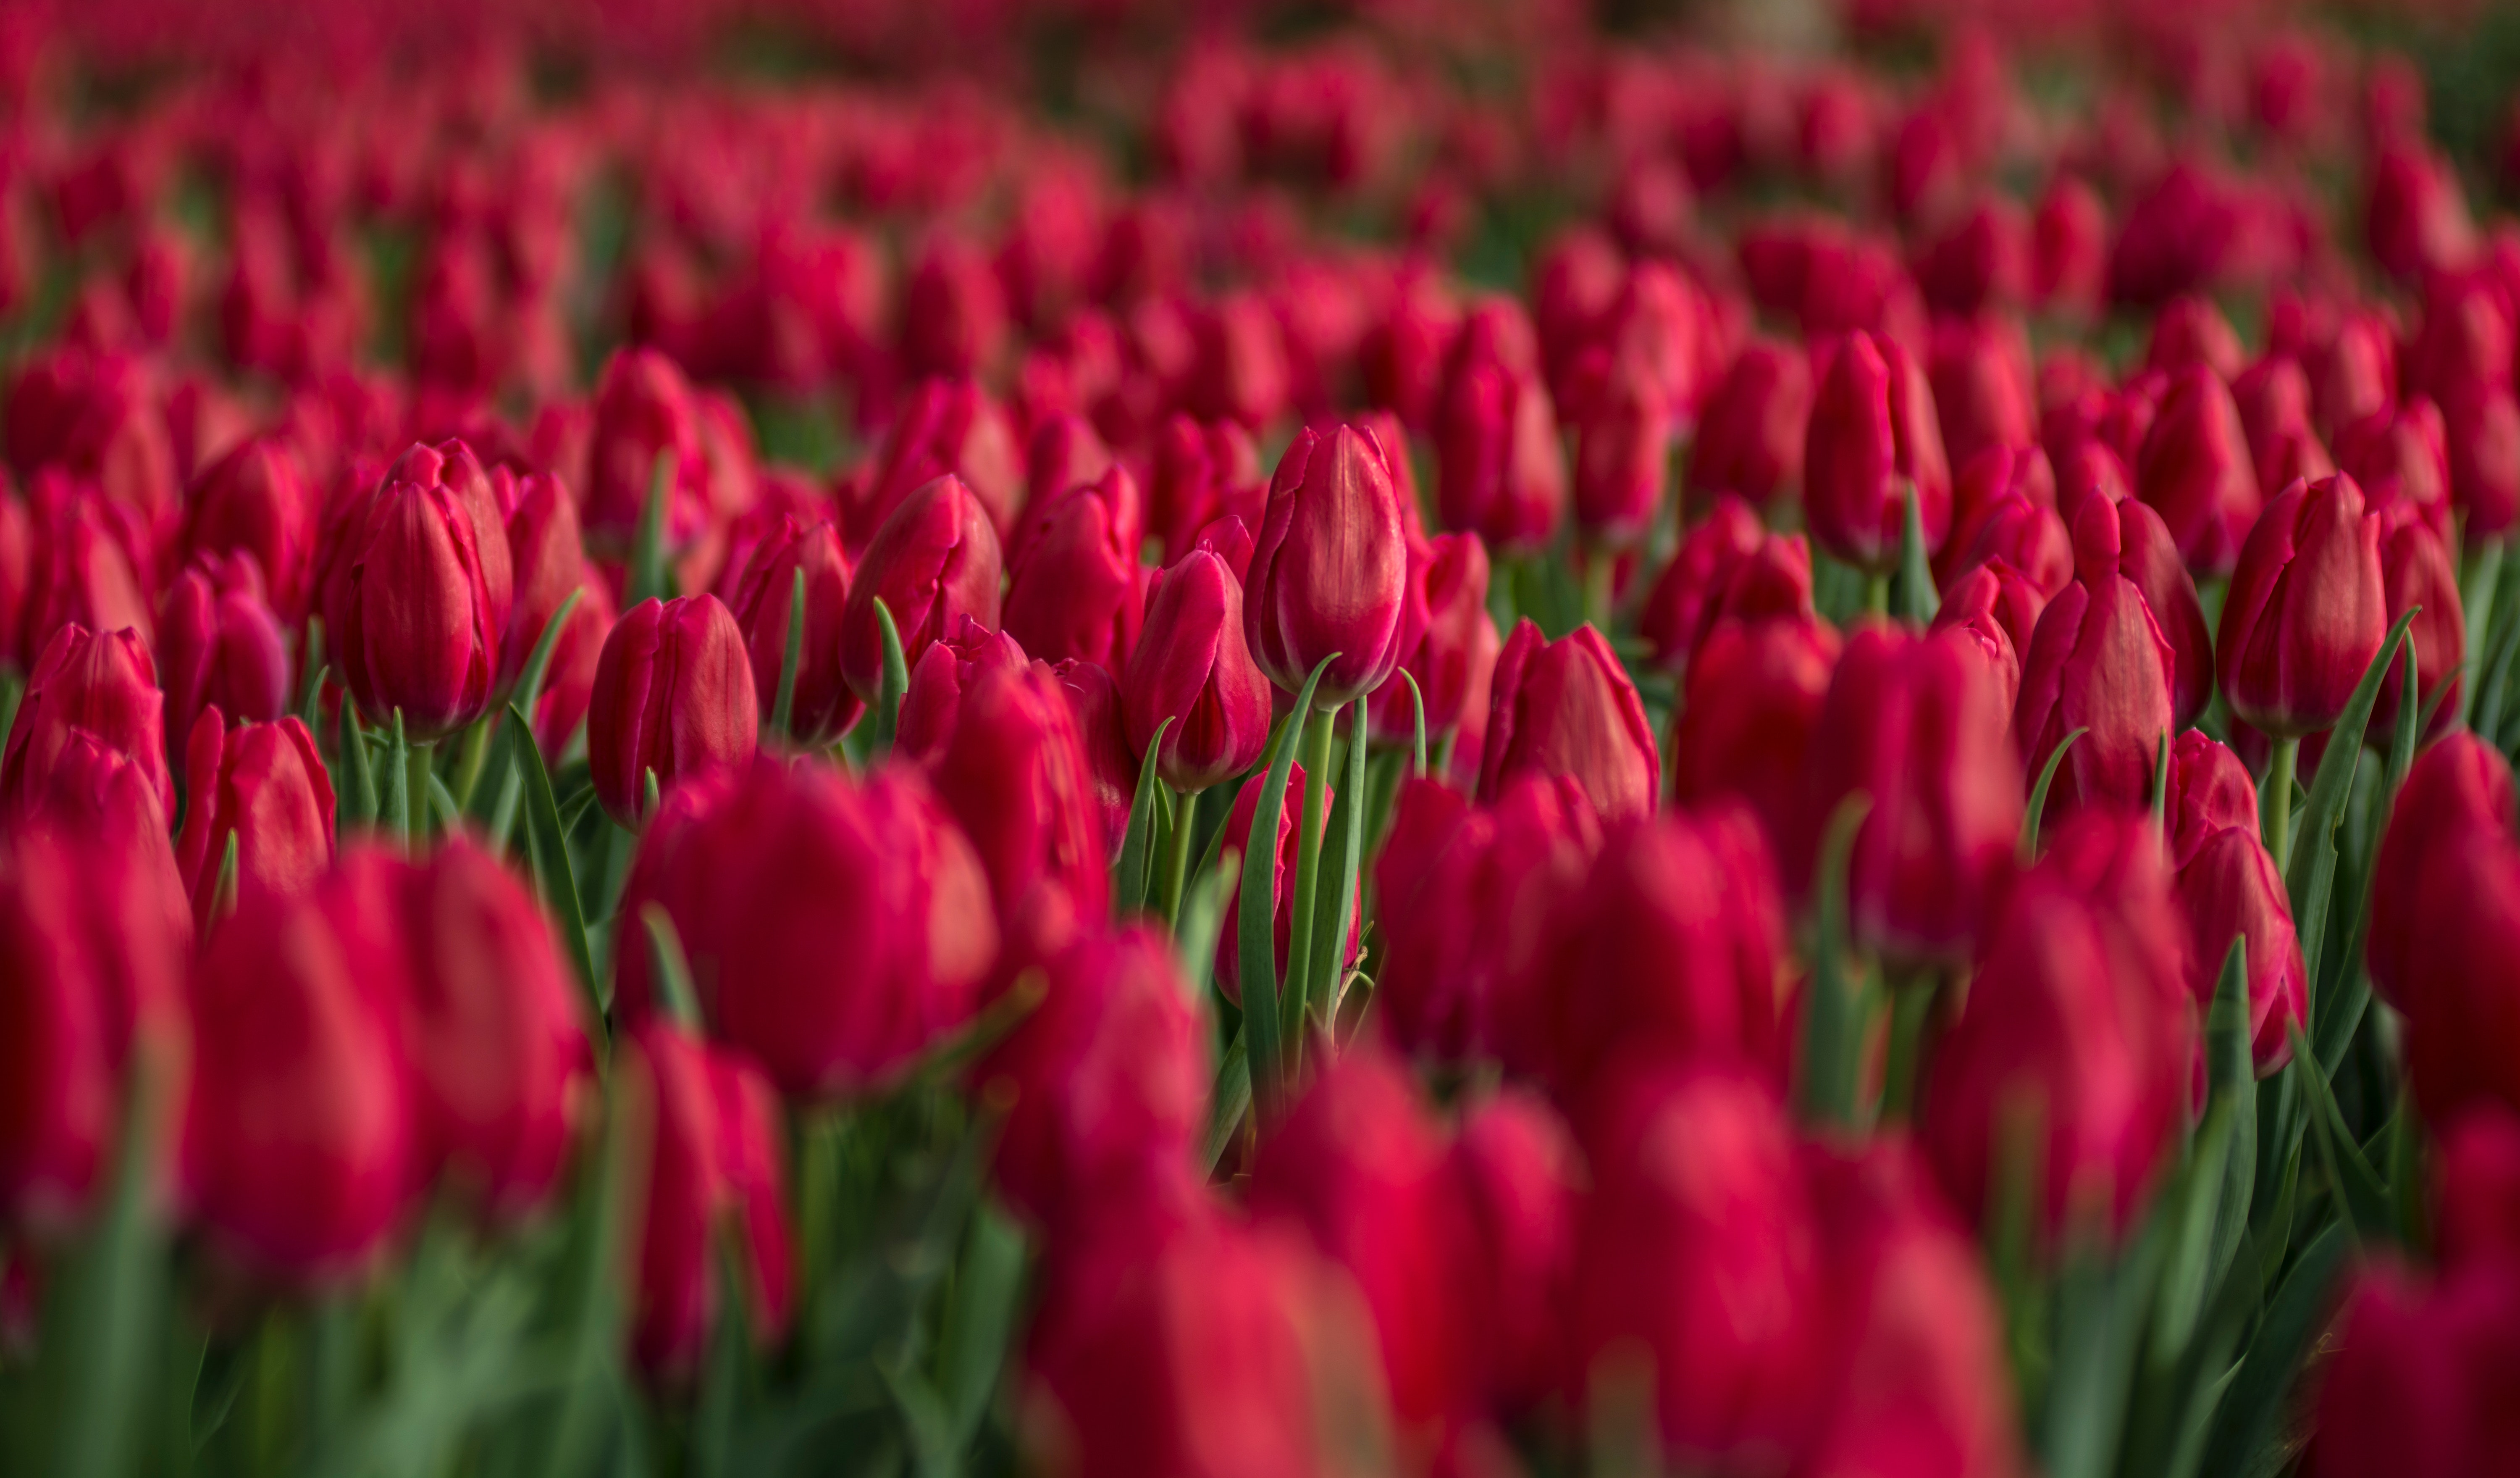 Red Tulip Flower Field Close-up Photo, Beautiful, Growth, Tulips, Summer, HQ Photo